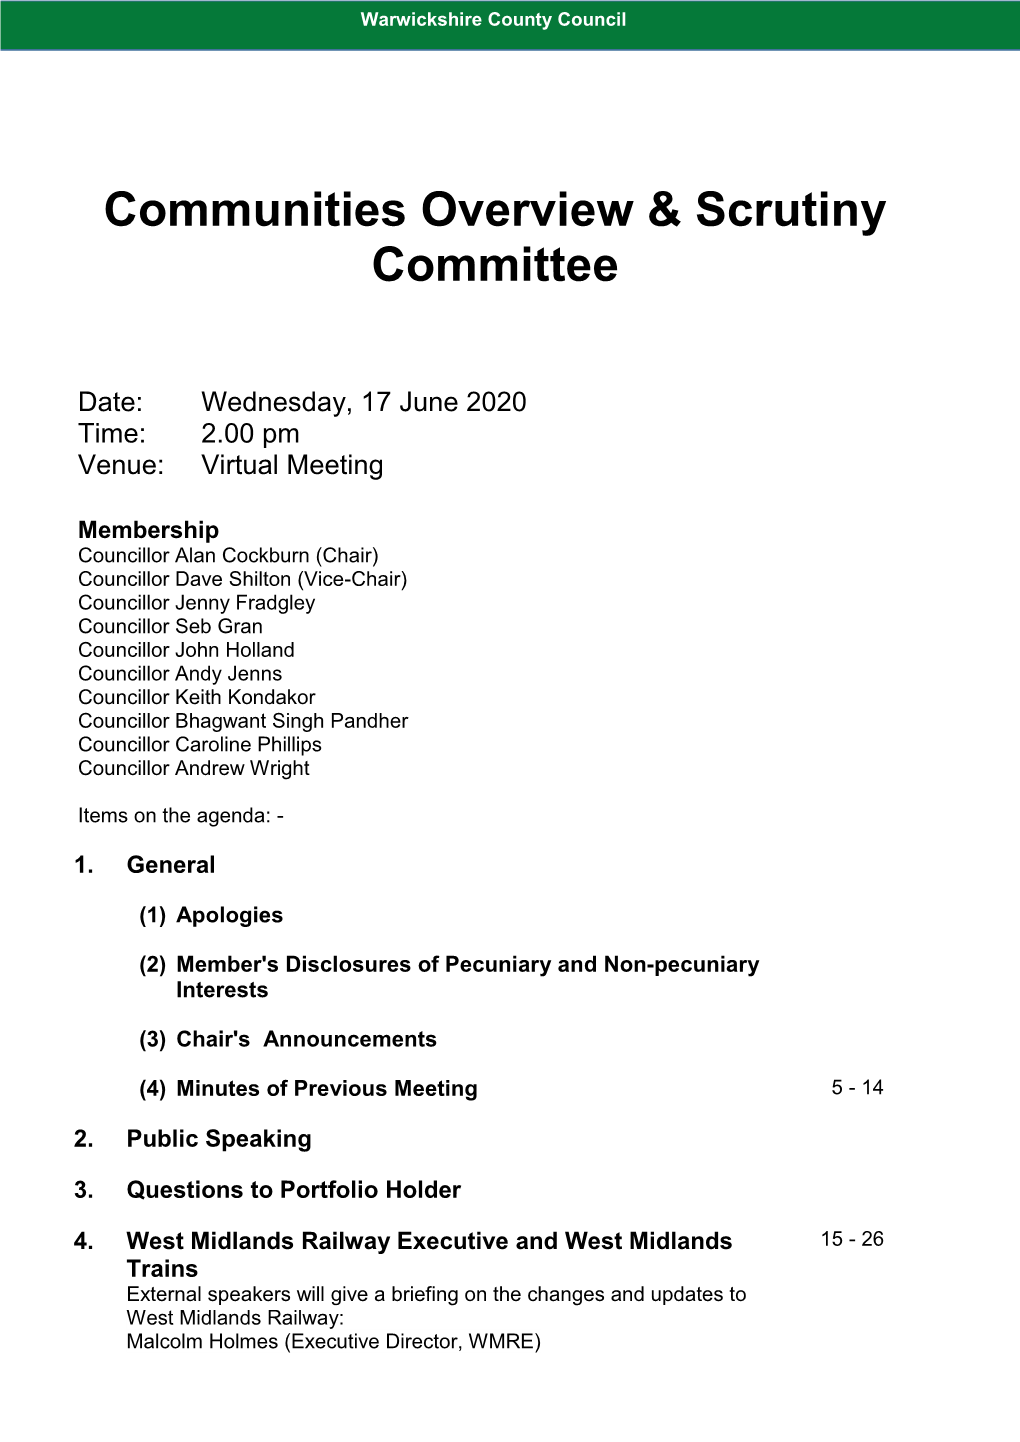 (Public Pack)Agenda Document for Communities Overview & Scrutiny Committee, 17/06/2020 14:00